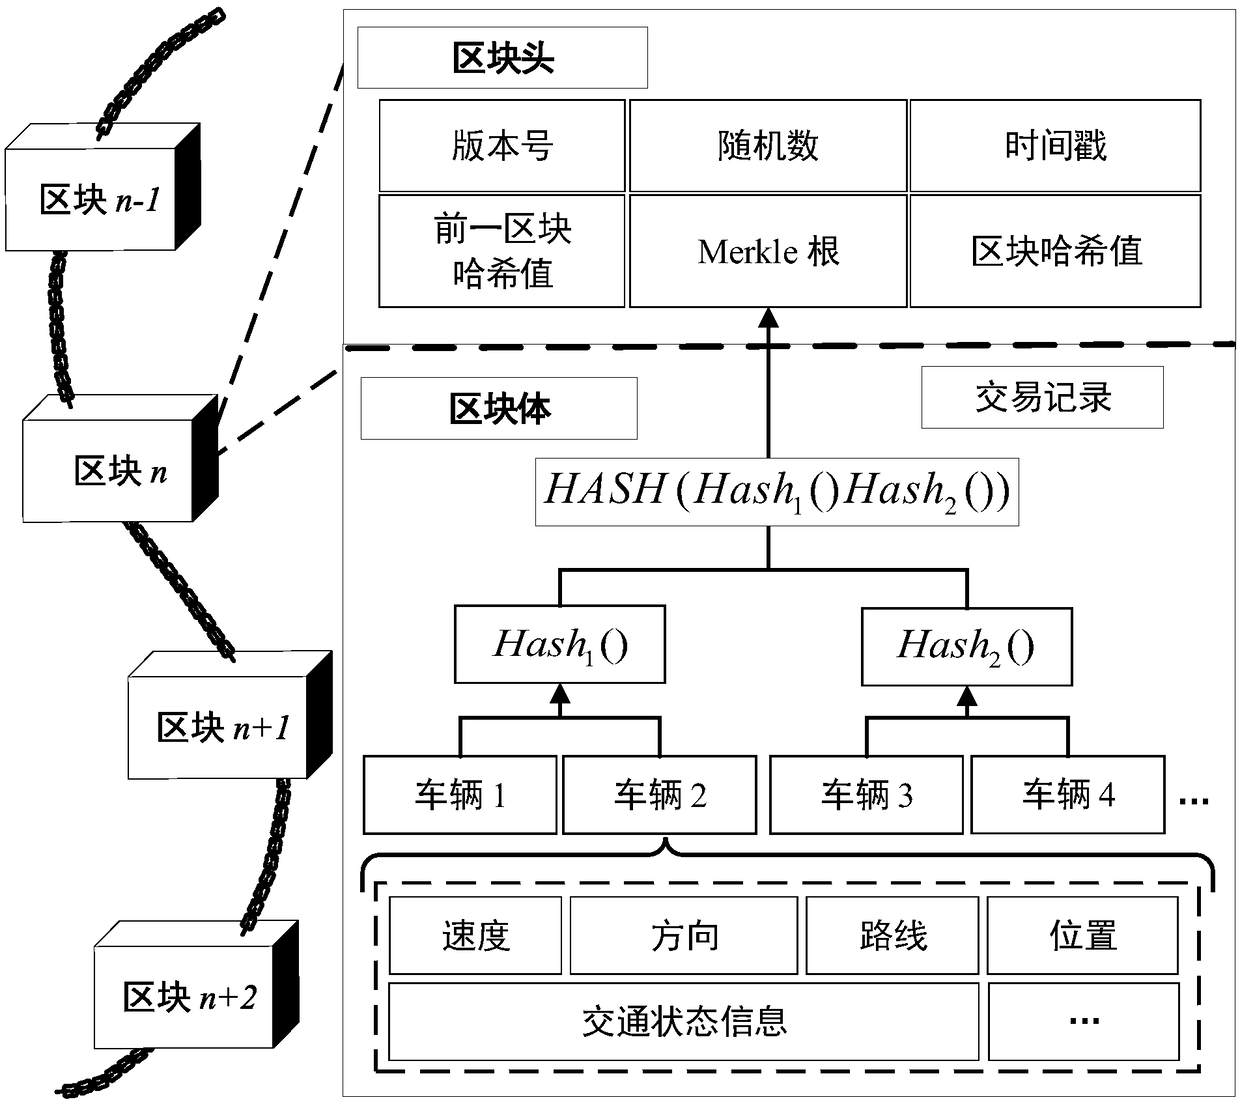 Vehicular ad-hoc network data security sharing and storage system based on blockchain technology